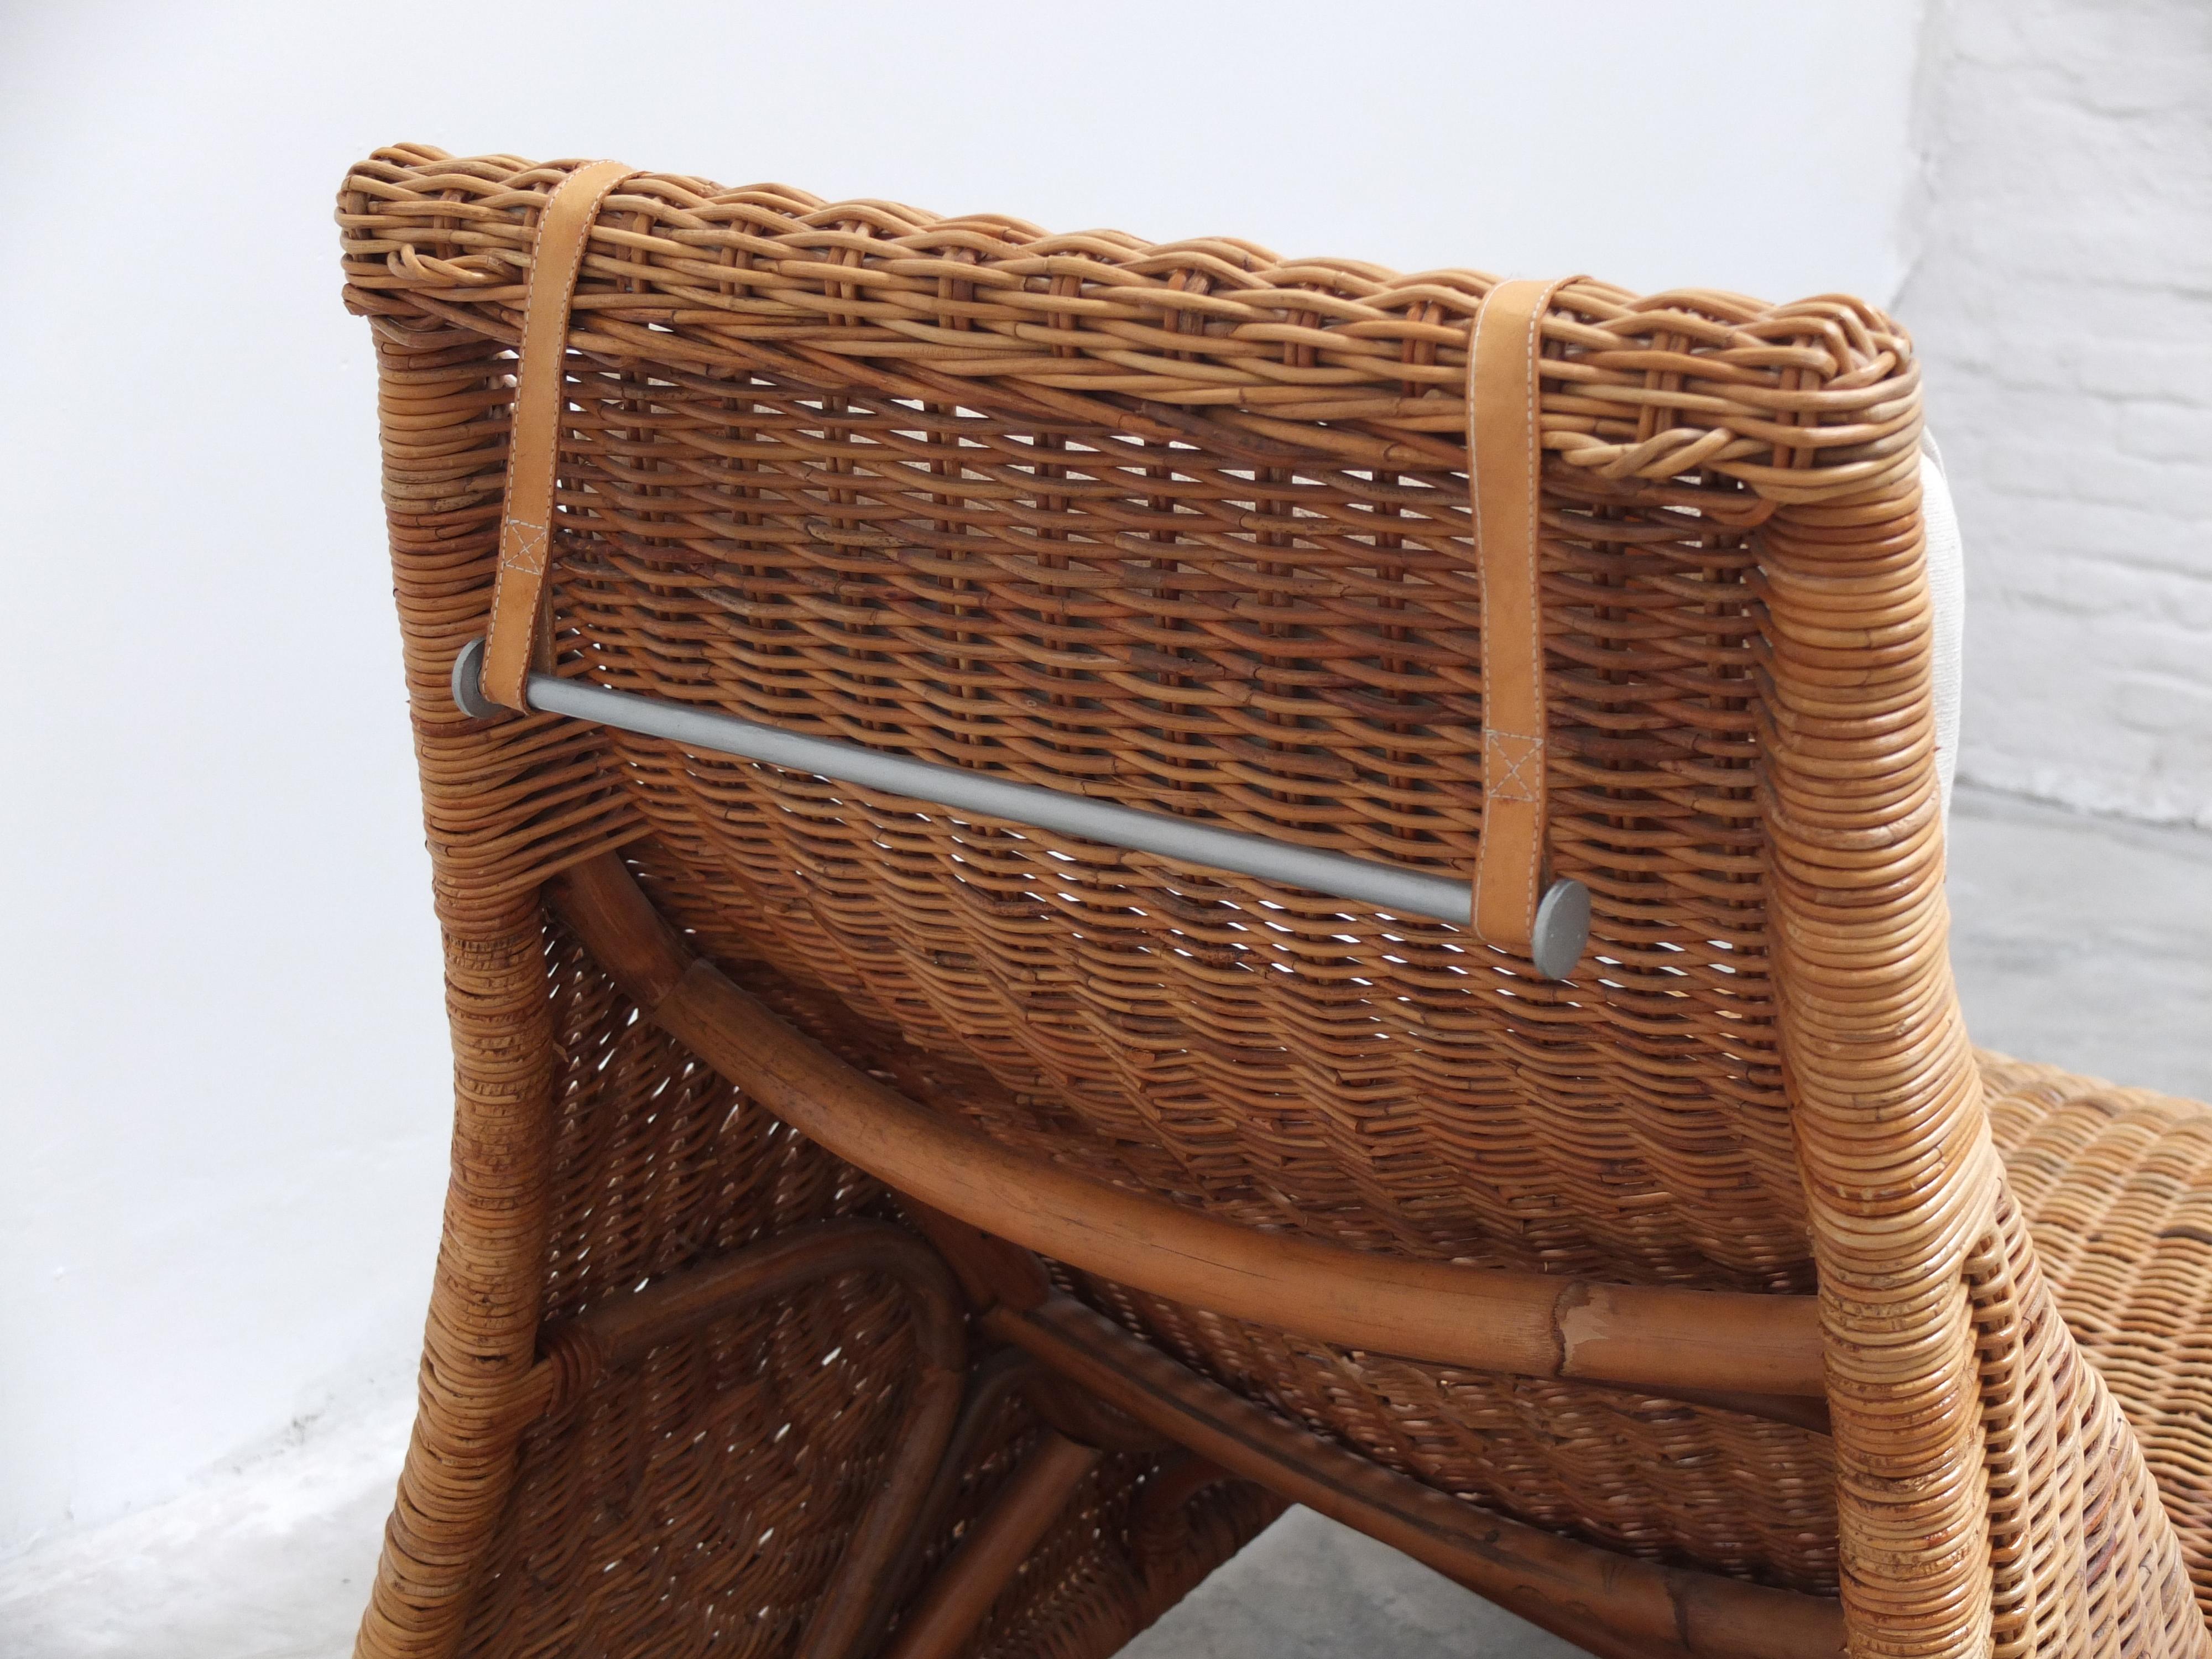 Rattan 'Karlskrona' Chaise Longue by Karl Malmvell for IKEA, 1998 For Sale 1